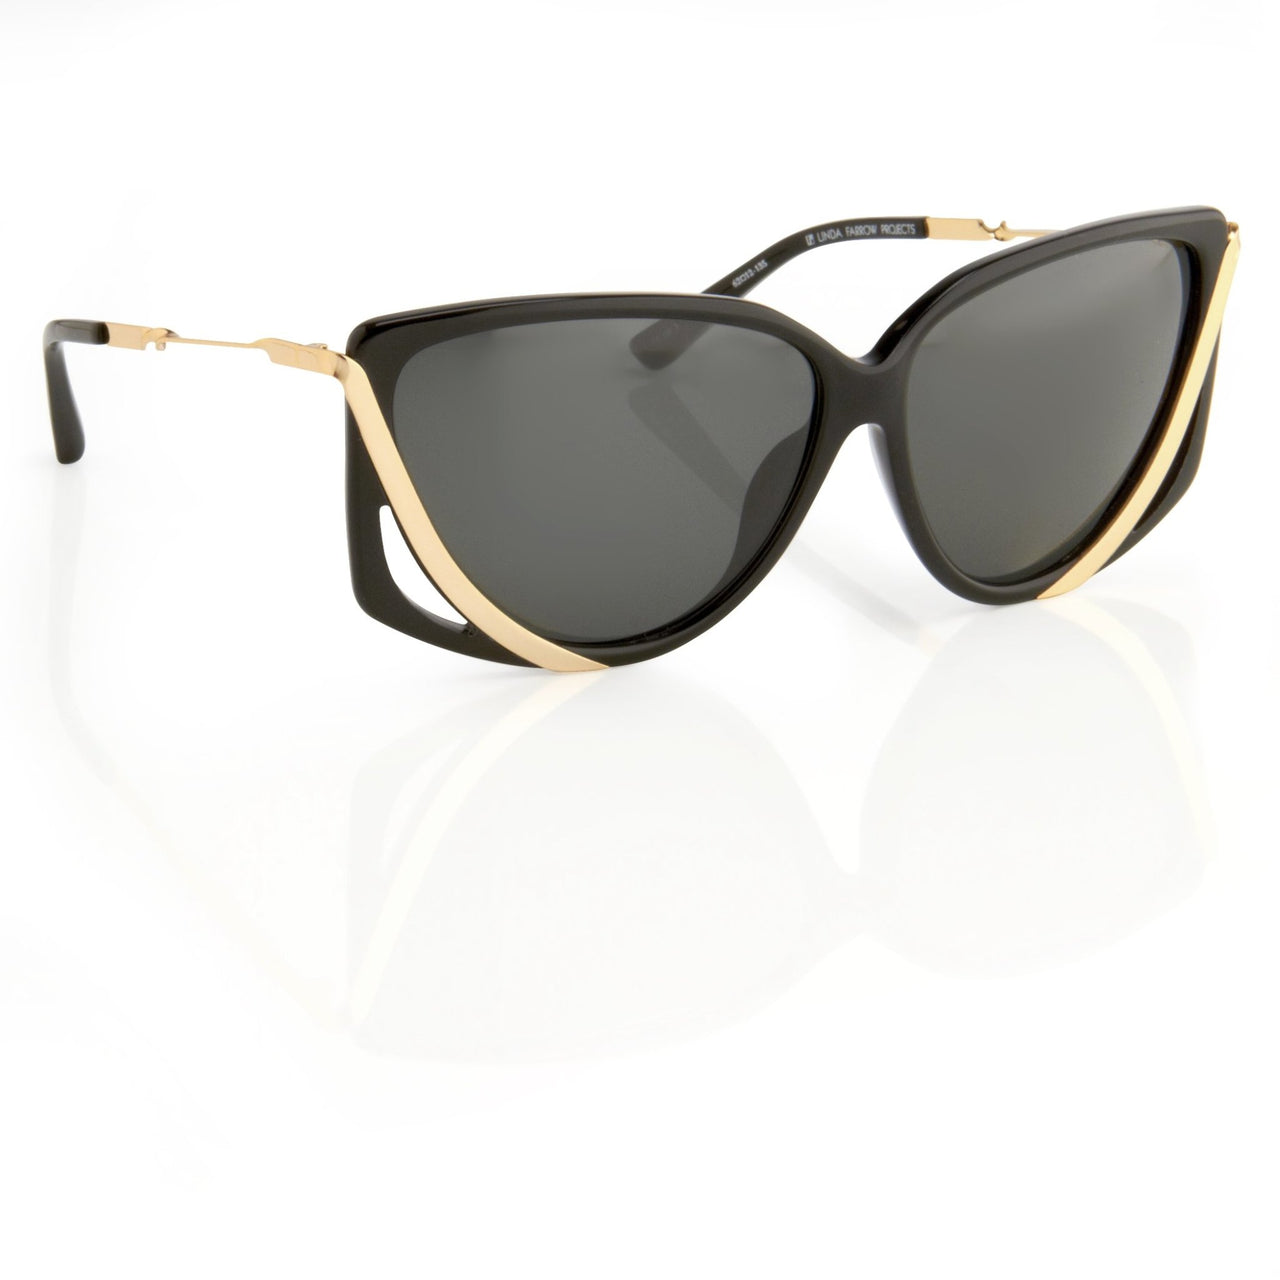 Prabal Gurung Sunglasses Rectangular Black Cut Out With Grey Category 3 Lenses PG4C1SUN - Watches & Crystals